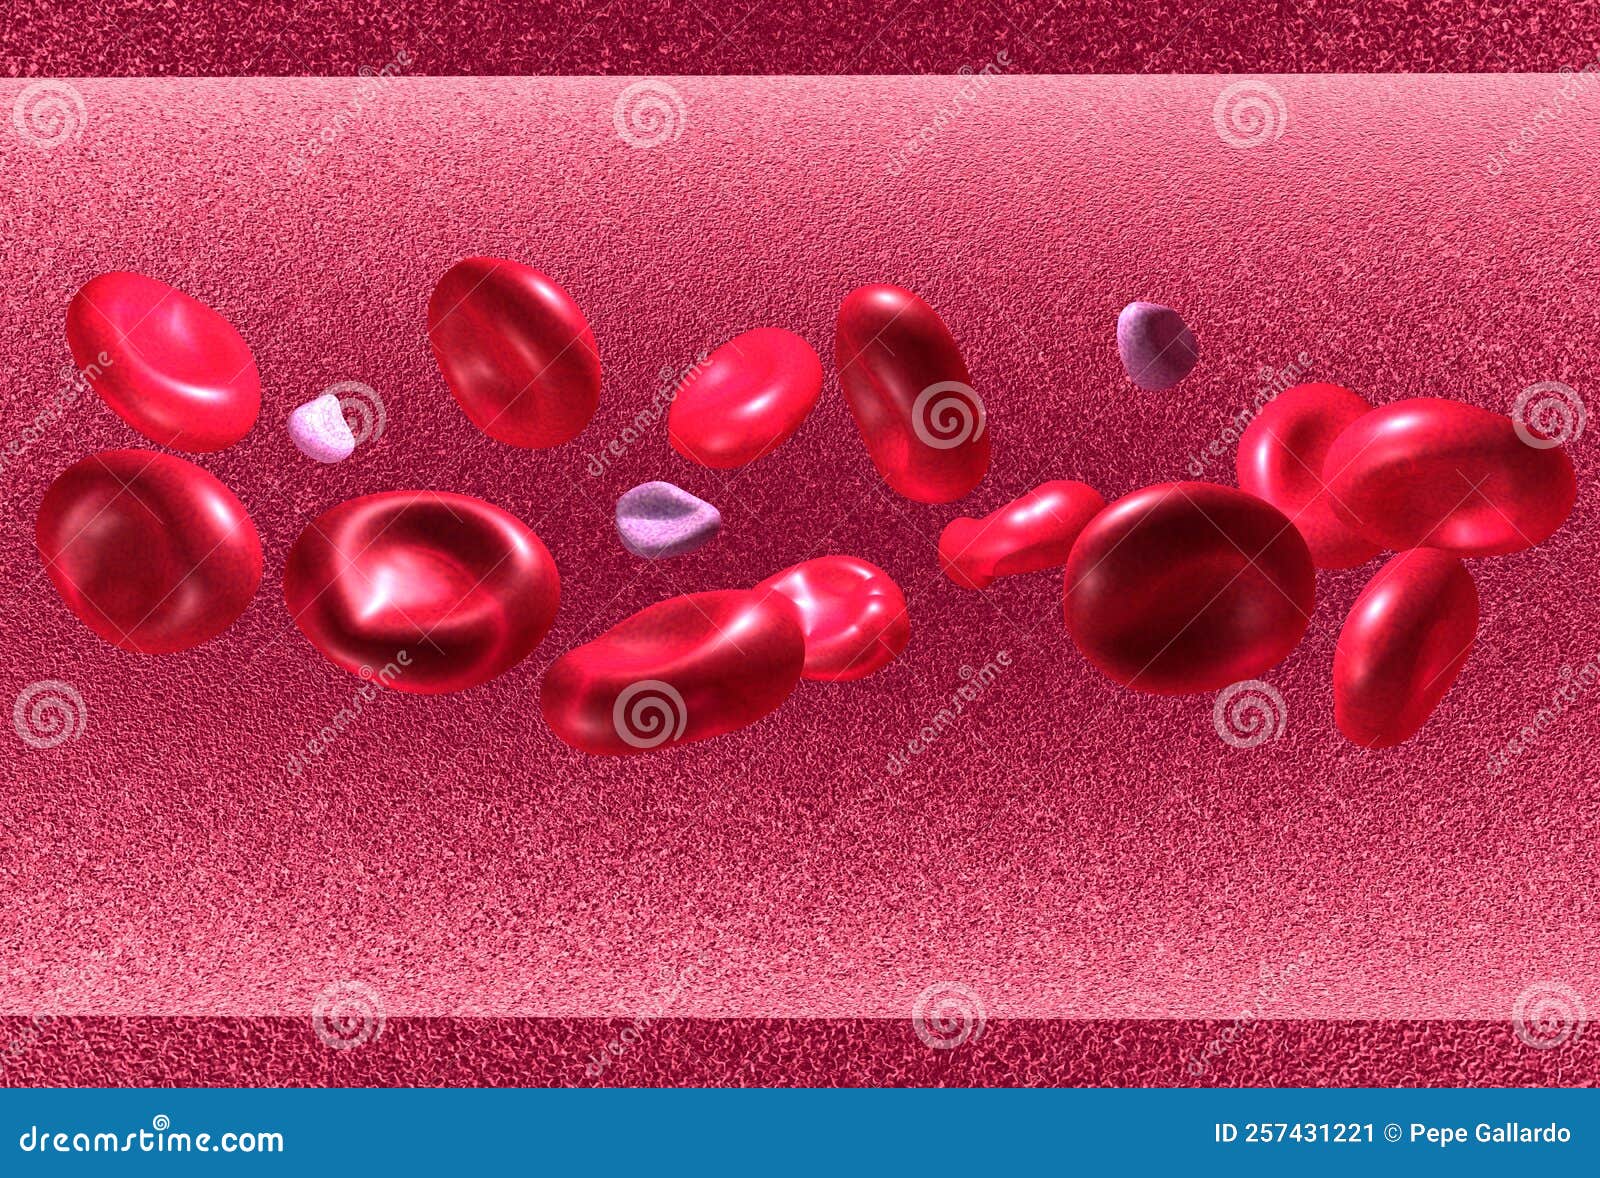 anatomical 3d  of red blood cells.